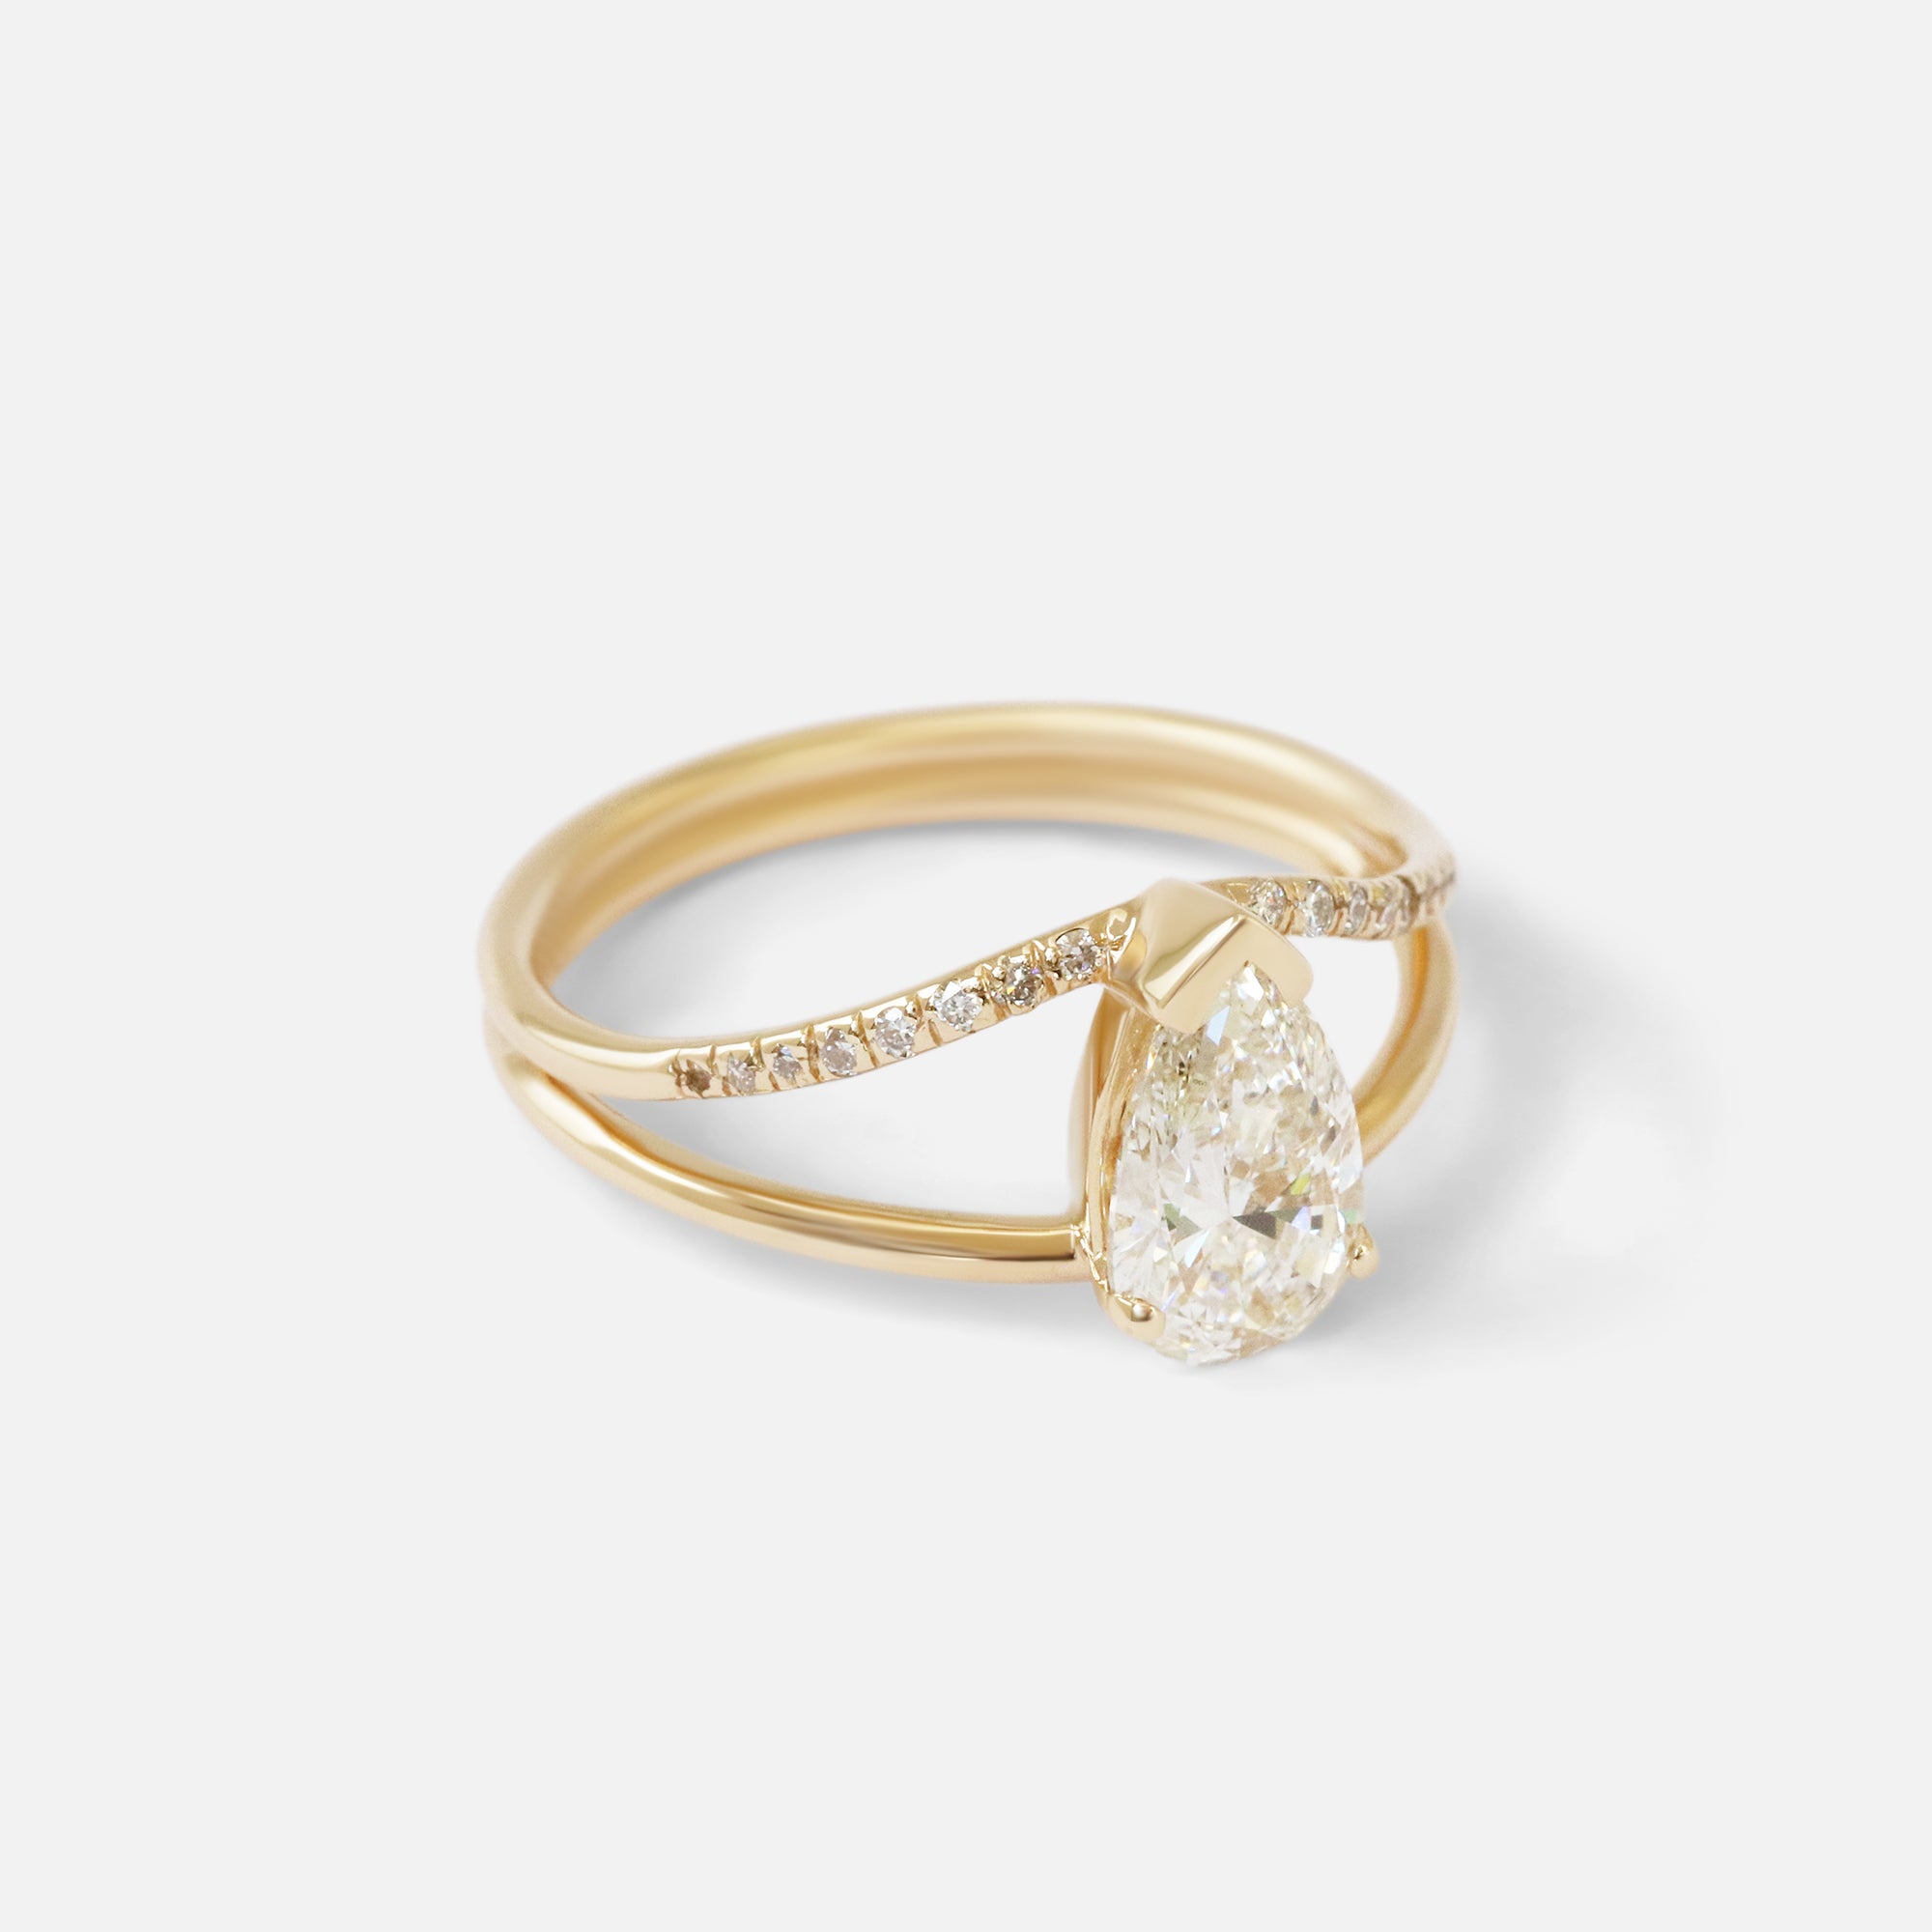 Rhea / Pear By Ruowei in Engagement Rings Category